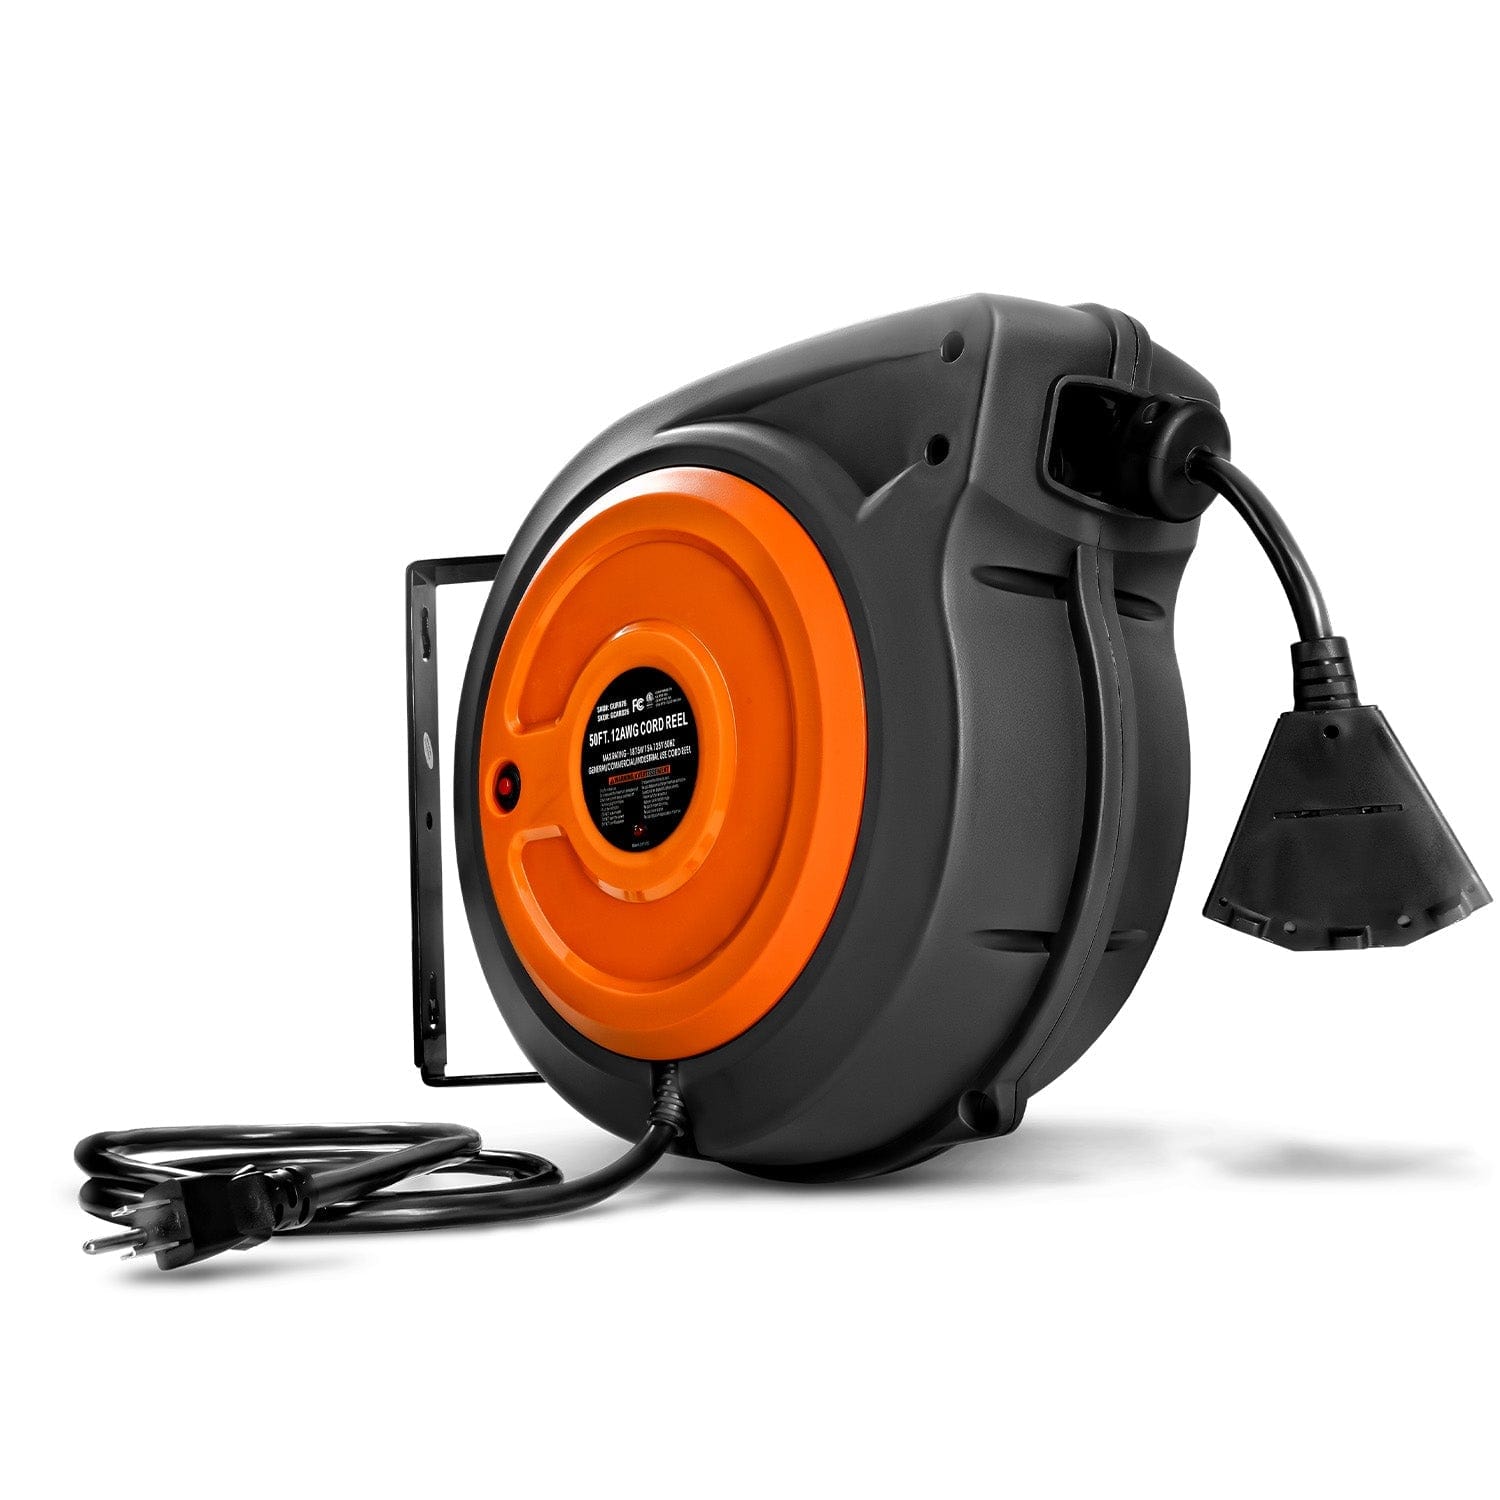 SuperHandy Retractable Extension Cord Reel Alexa Ready 12AWG 50ft